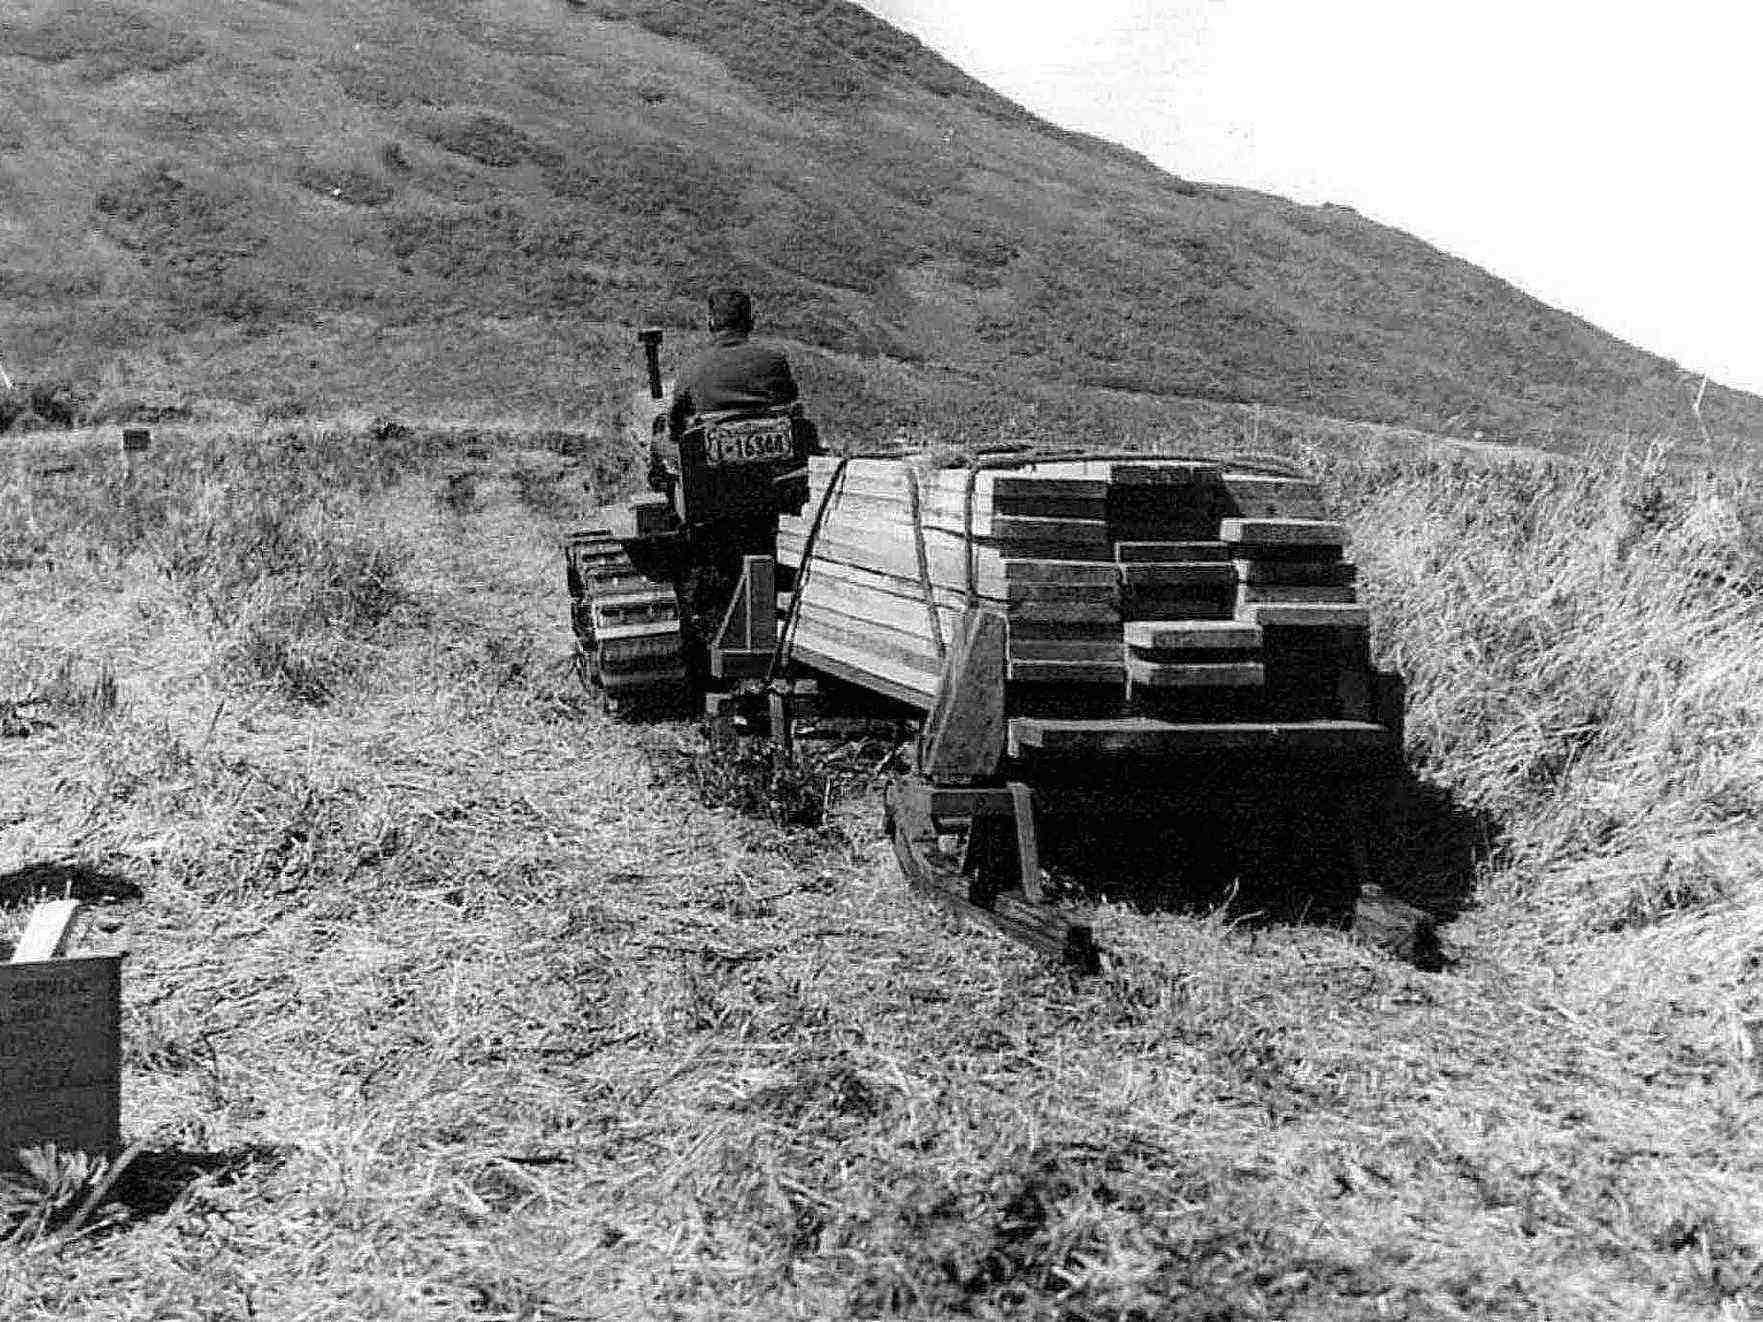 Tractor-hauling-weir-lumber-old-vintage-history-photo